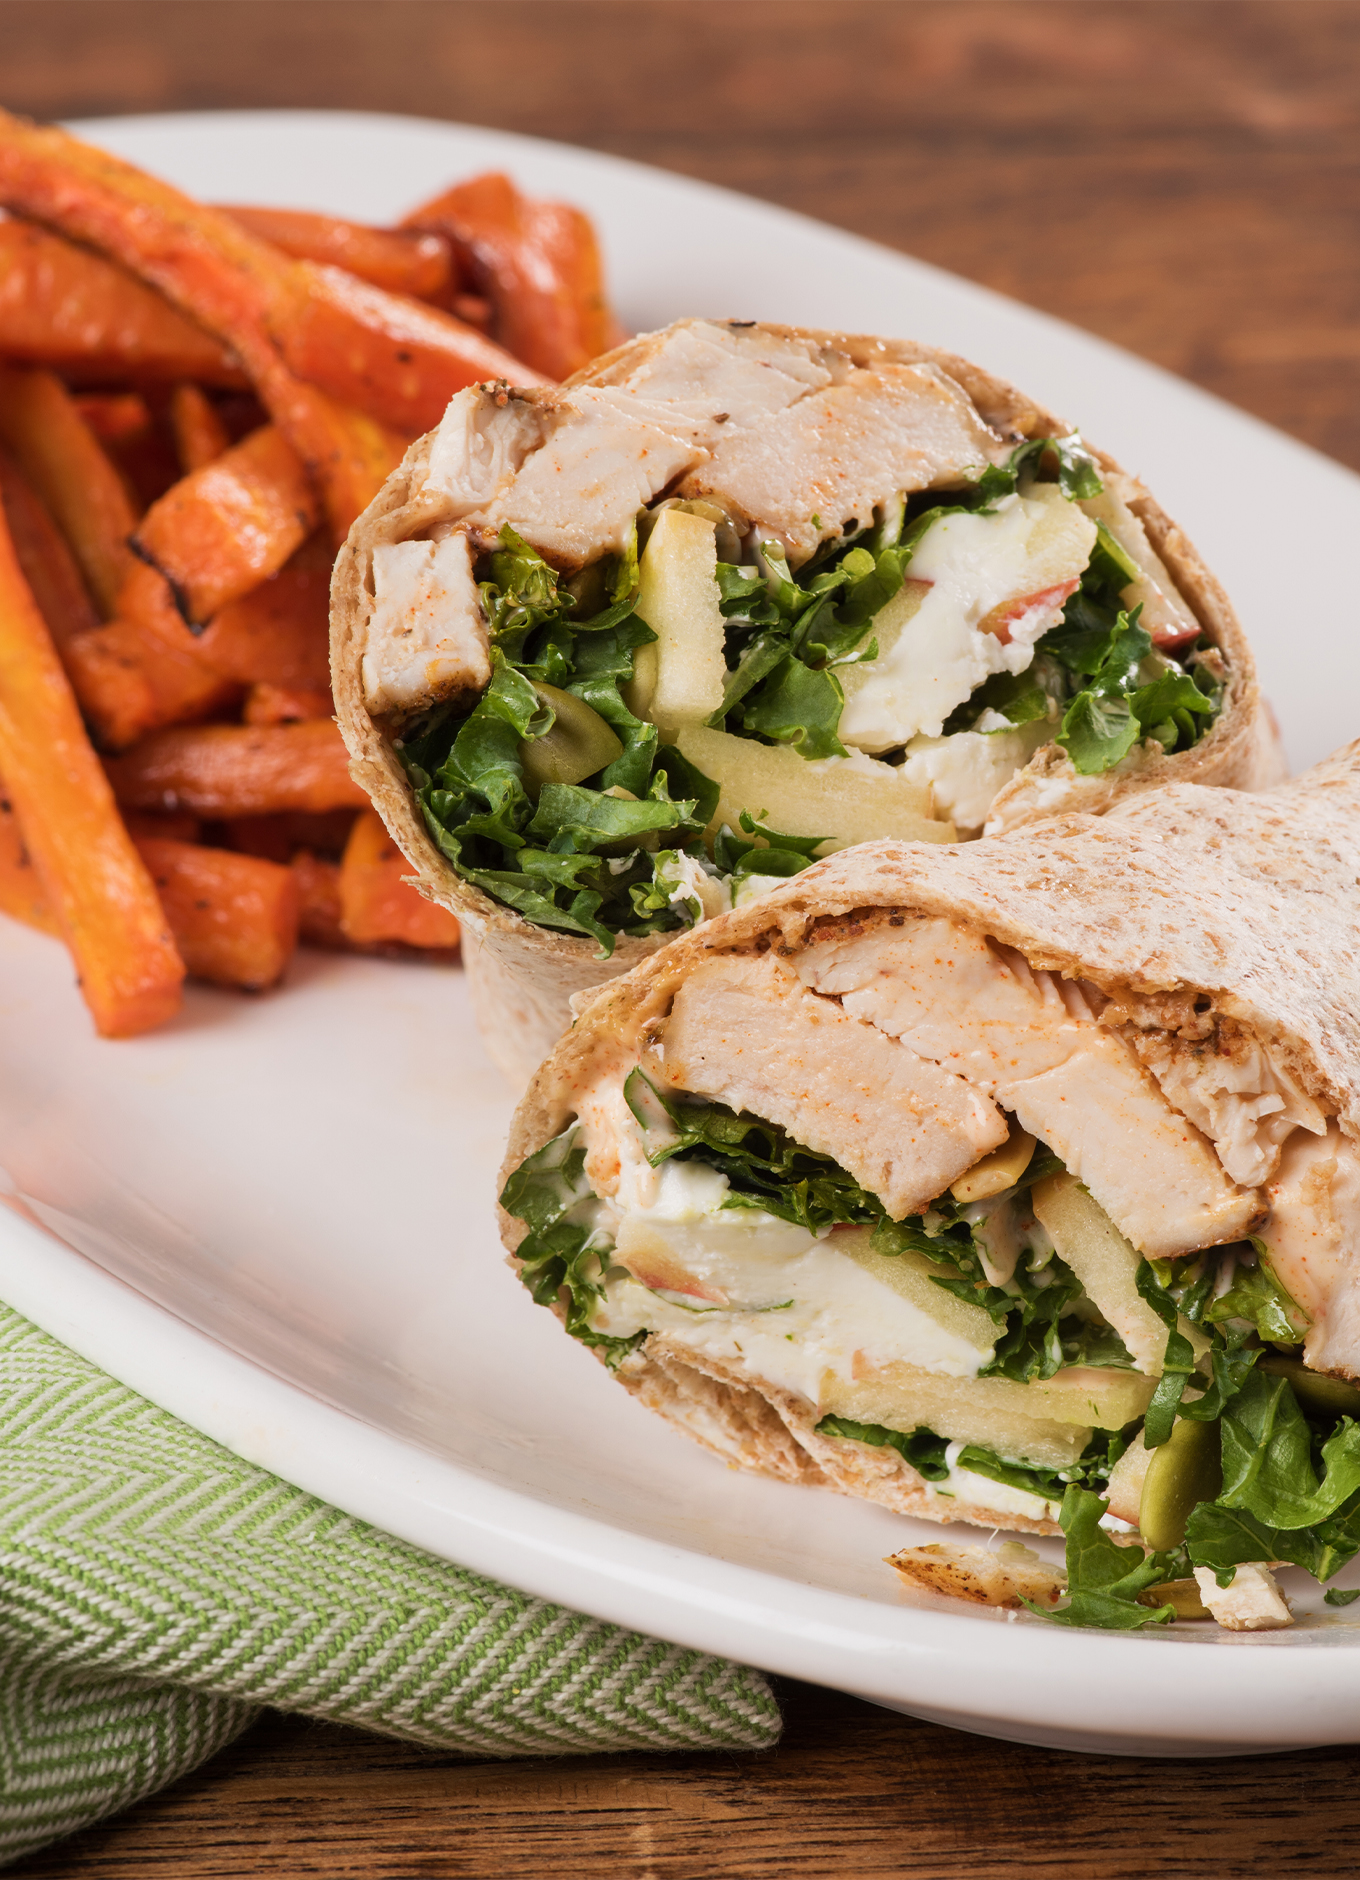 A cross section of a Spiced Chicken Wrap with a side of roasted carrot fries